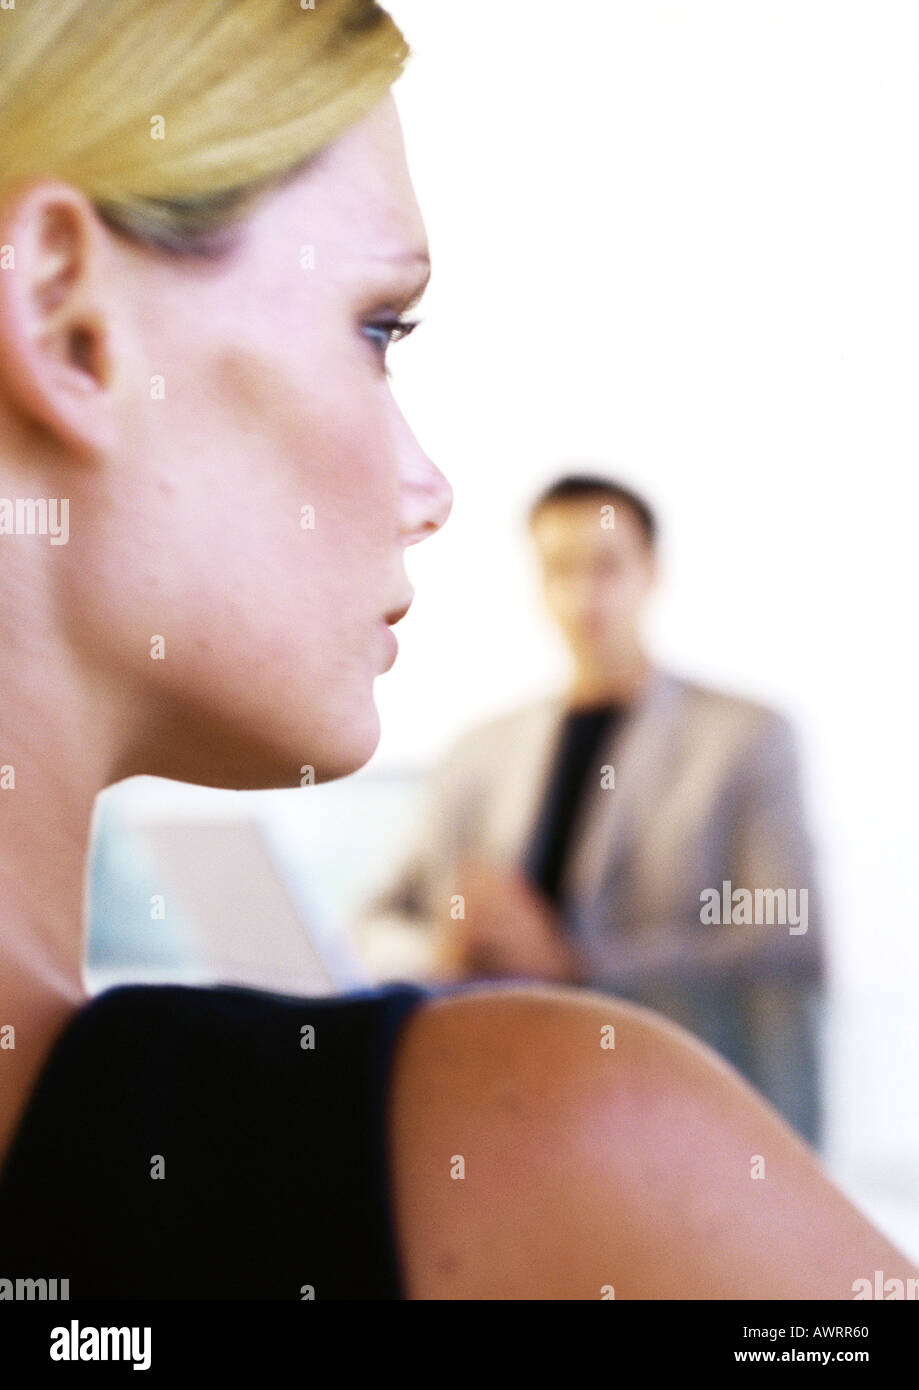 Businessman and woman, close-up of woman's head and shoulder, rear view Stock Photo